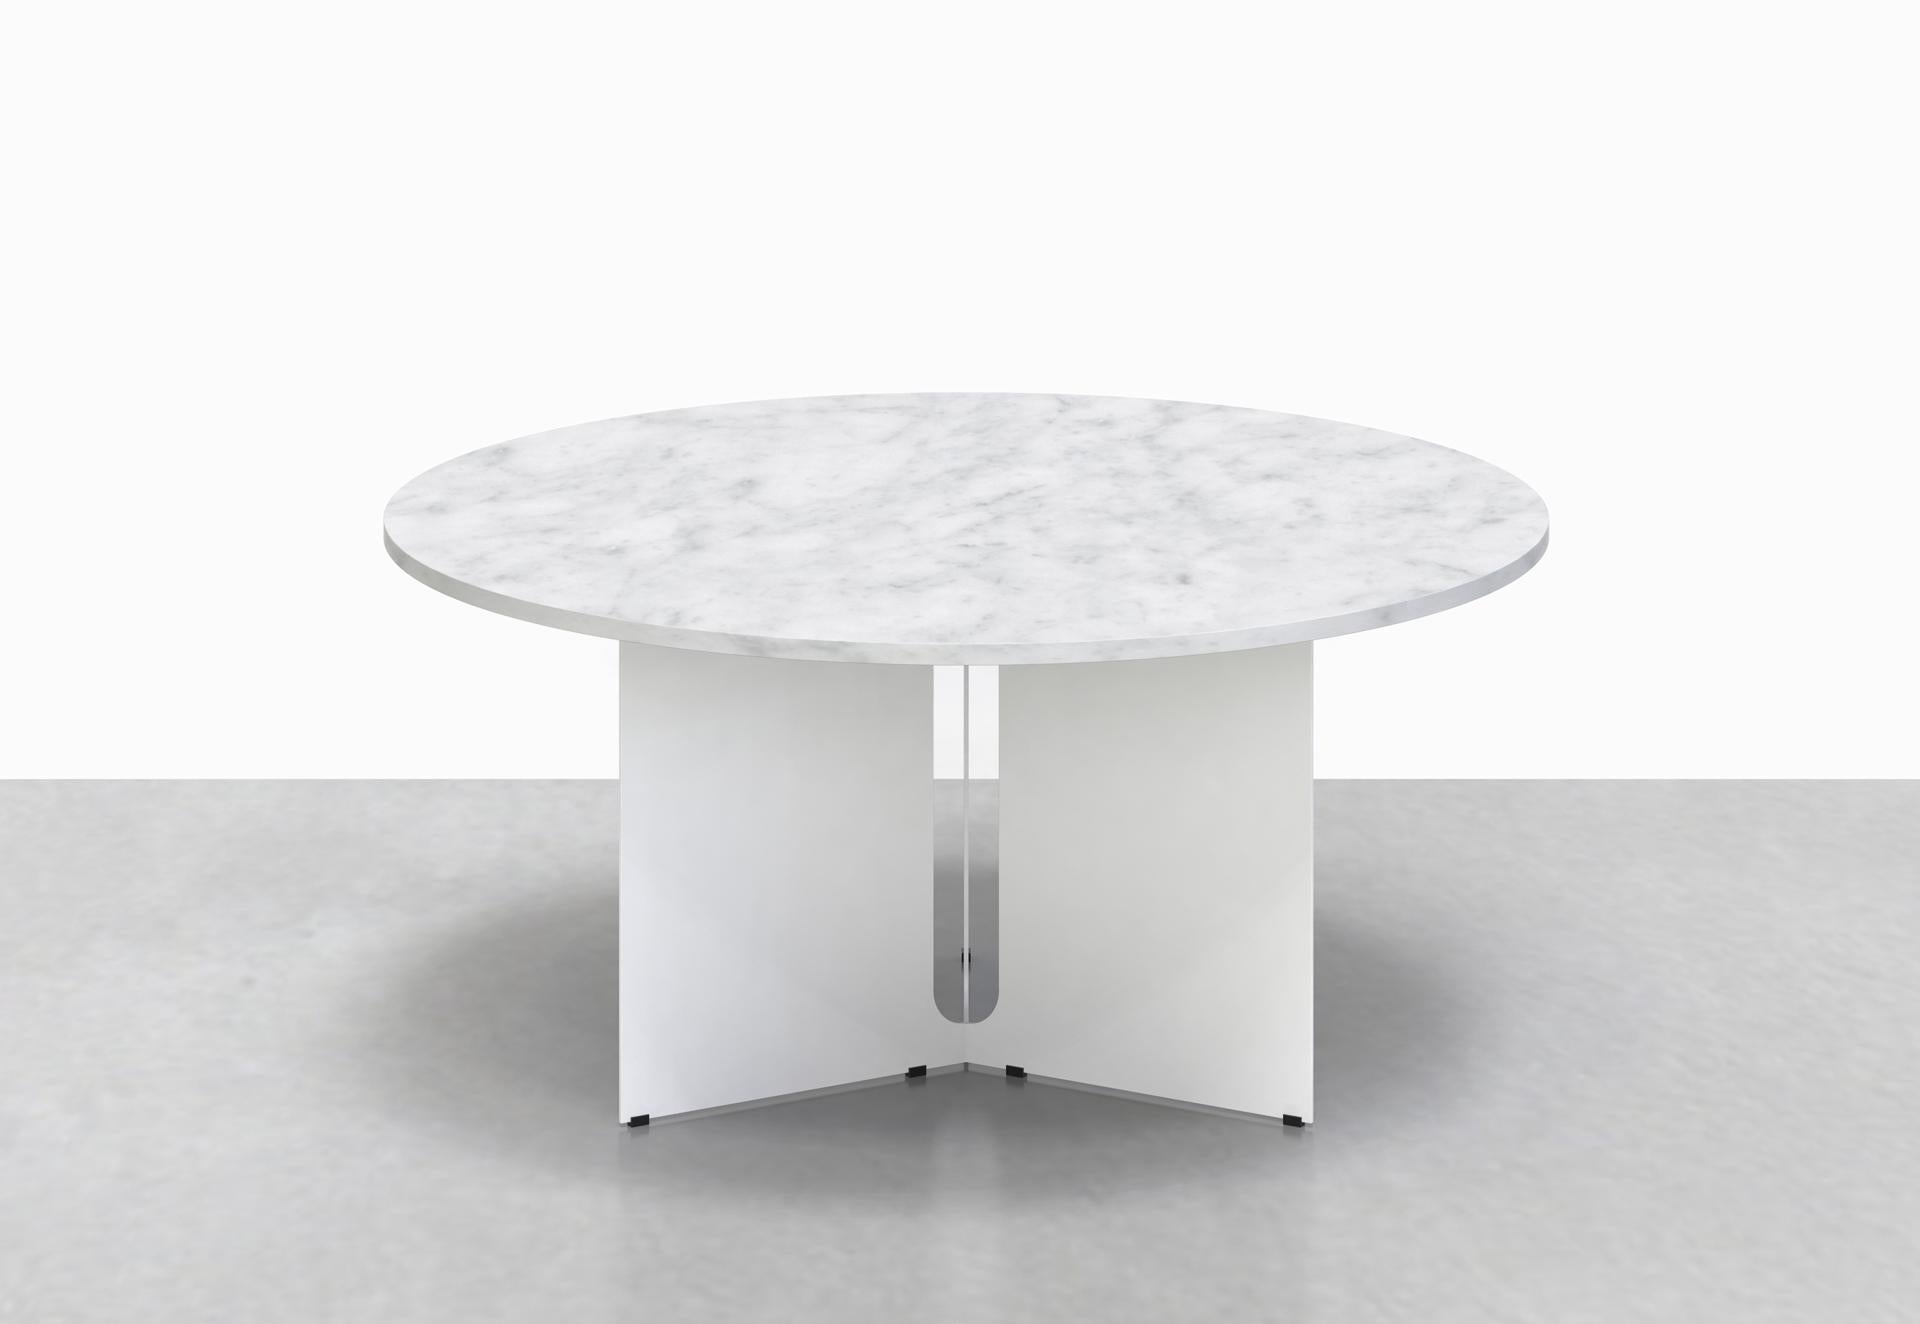 Our Trilo round table is polished but unpretentious. Choose between a solid walnut or variegated white marble top, anchored by a steel base with a playful geometrical cut-out detail. 